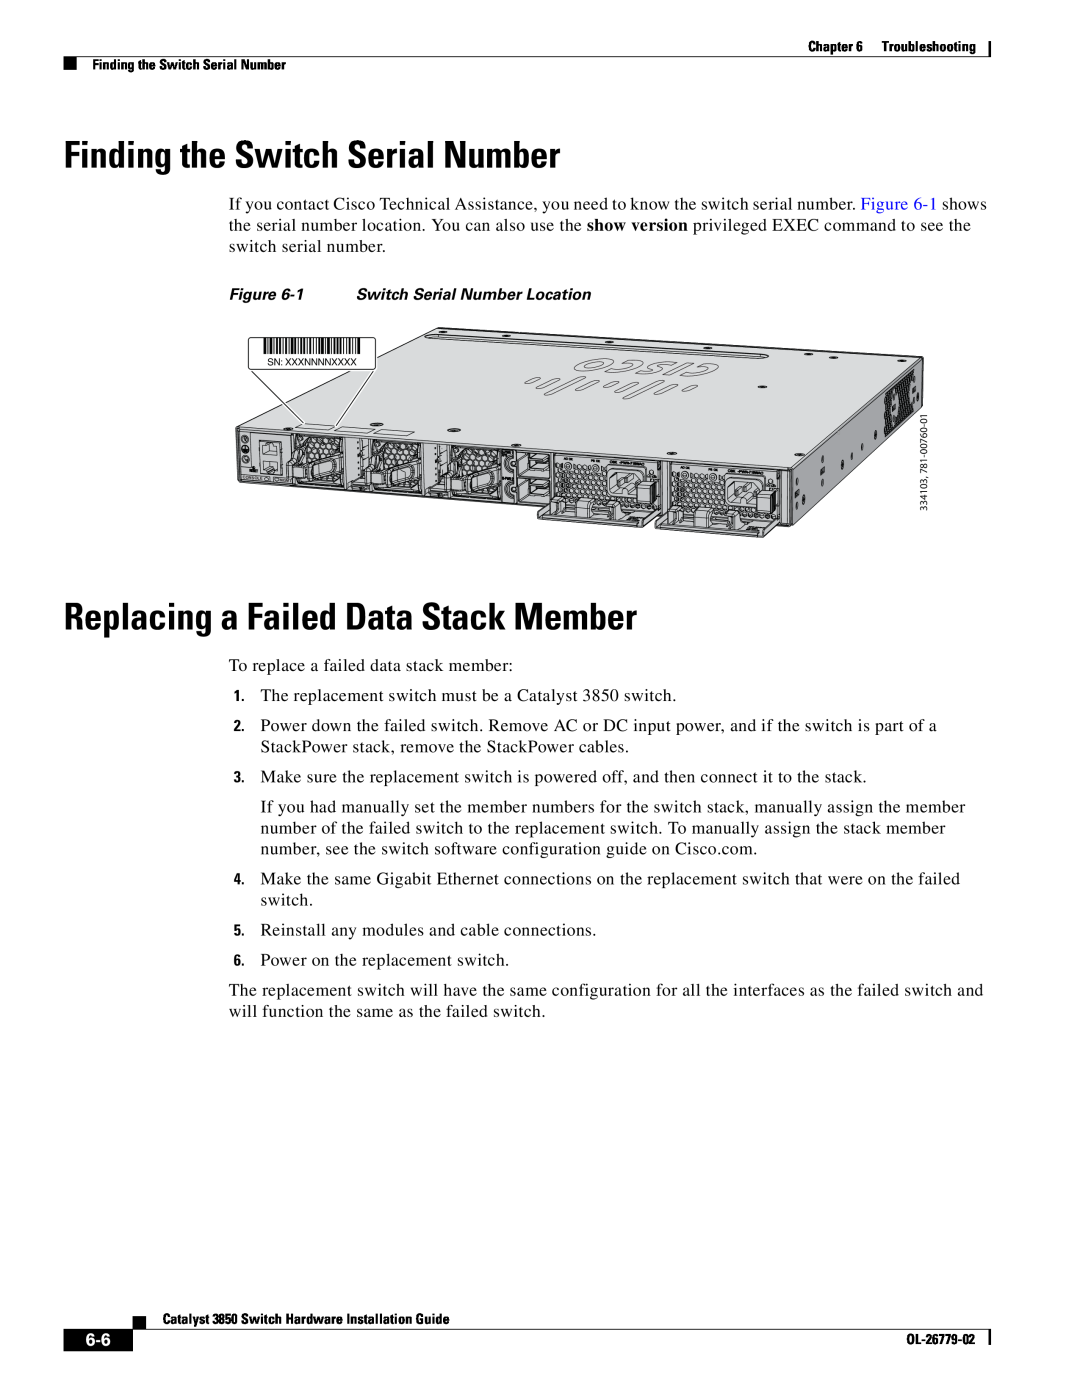 Cisco Systems C3850NM41G, WSC385024TS, C3850NM210G Finding the Switch Serial Number, Replacing a Failed Data Stack Member 